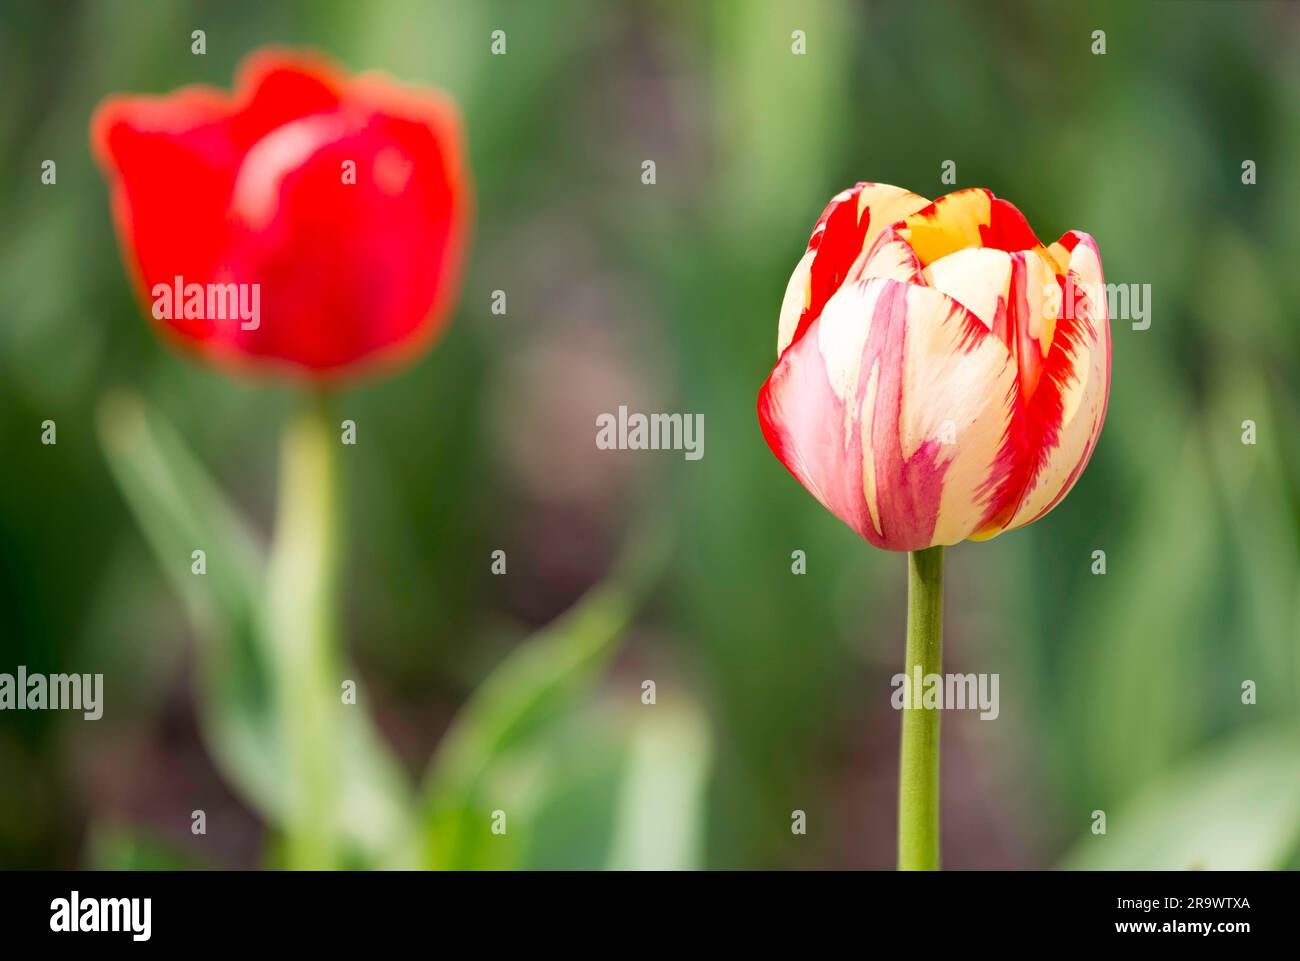 A delicate red and white tulip under the warm spring sun Stock Photo